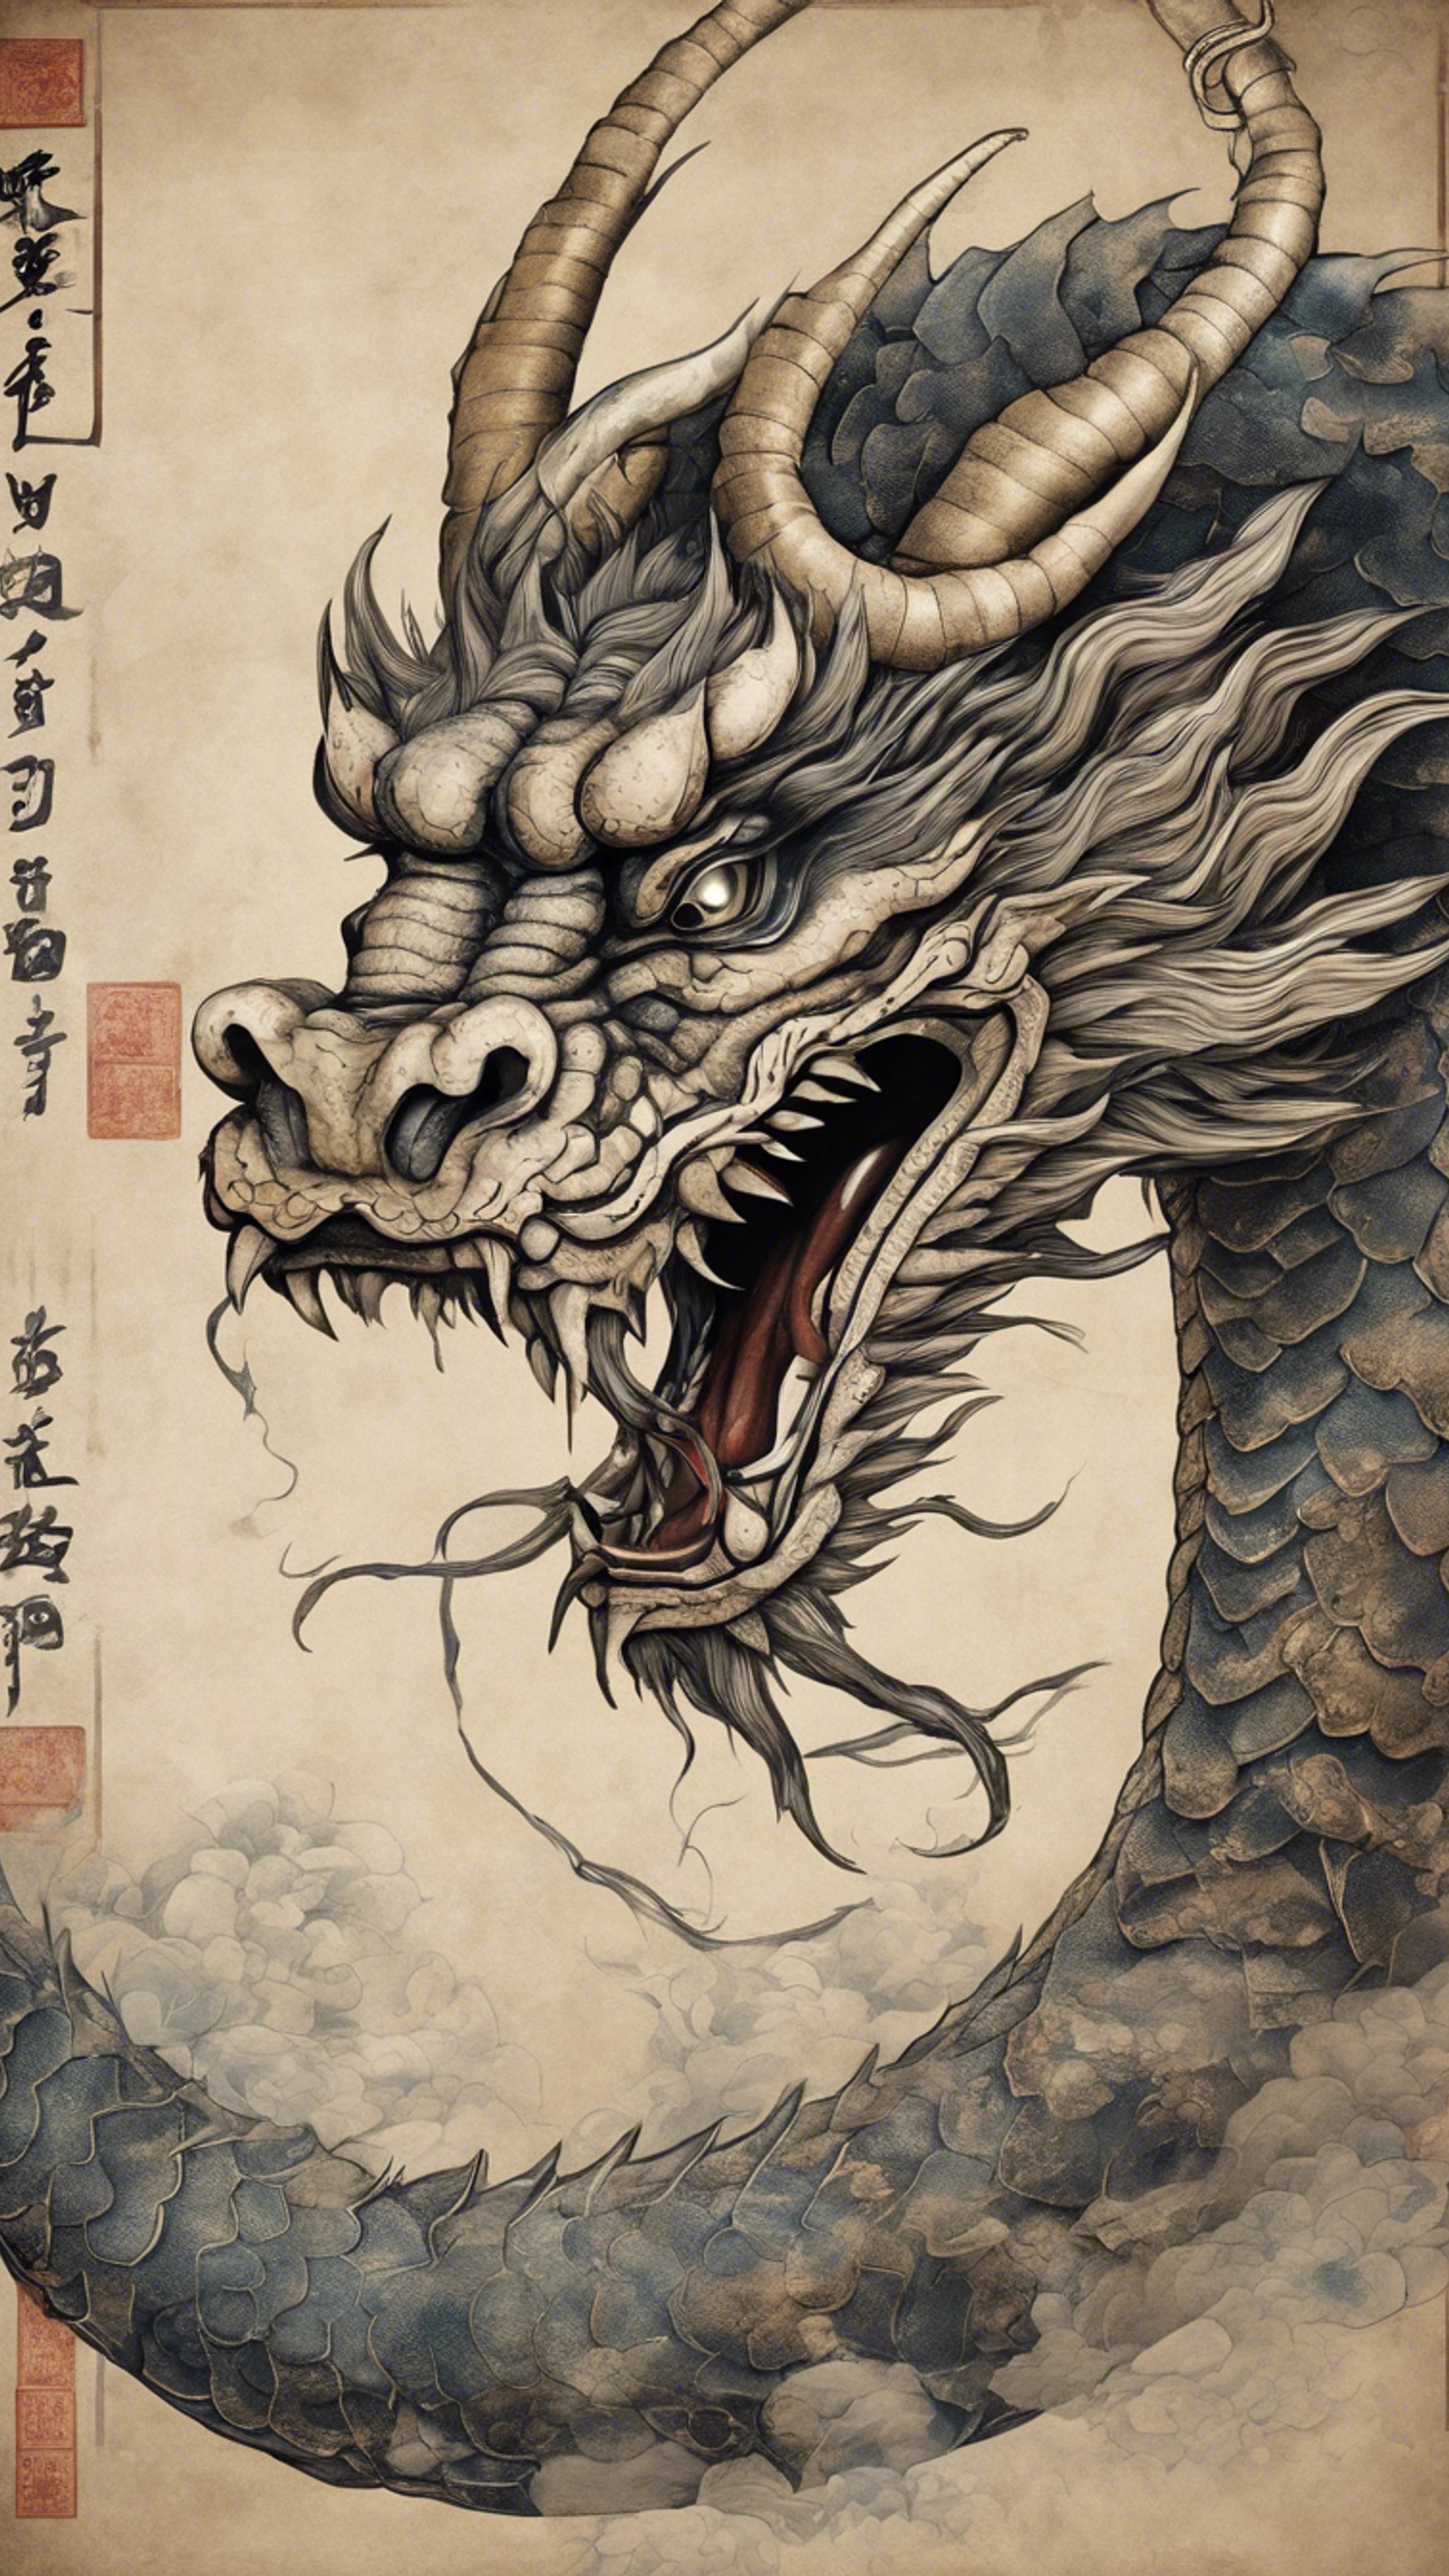 A majestic Japanese dragon illustrated in an ancient scroll. Hintergrund[ee61e4c394914154b9e3]